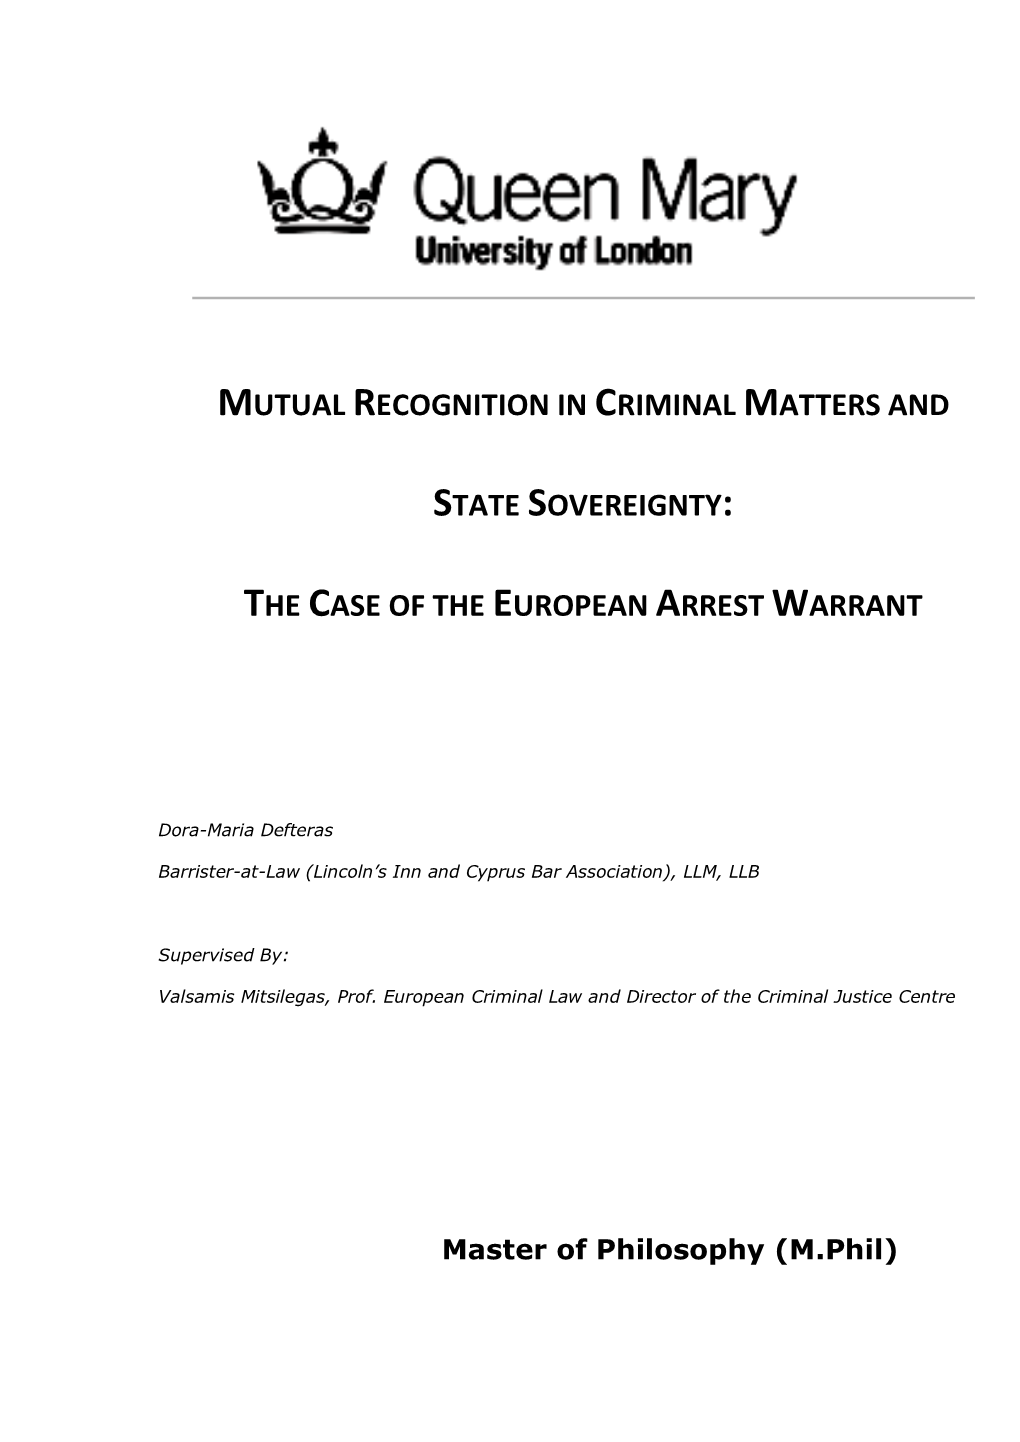 Mutual Recognition in Criminal Matters and State